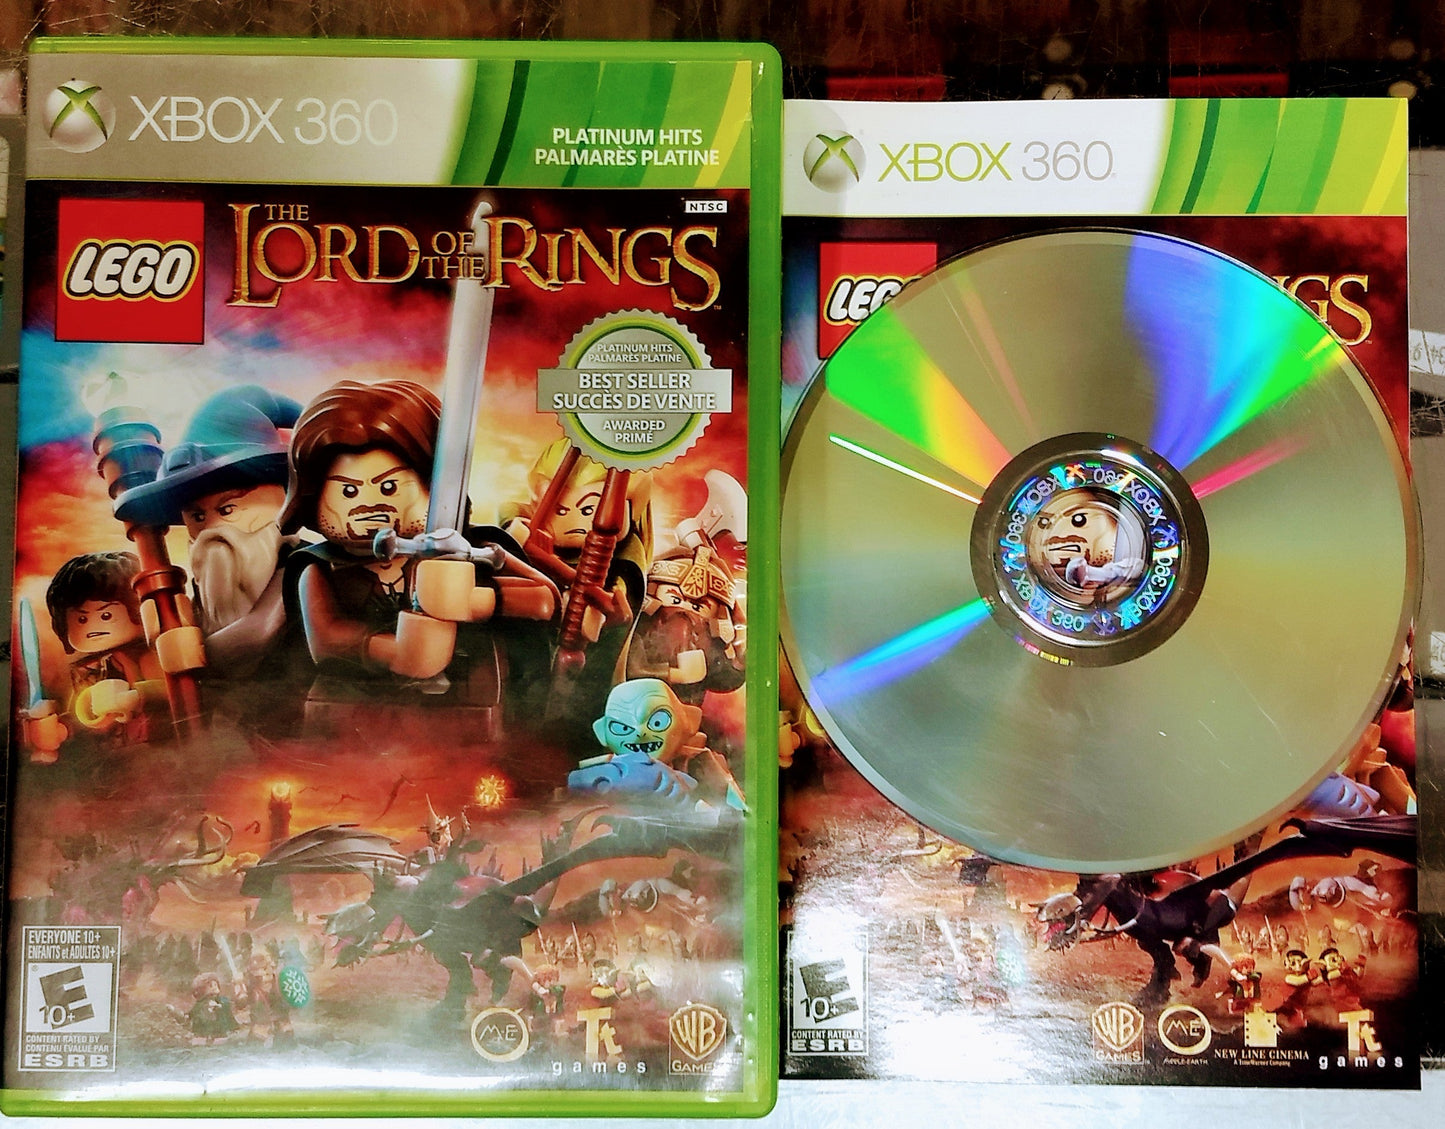 LEGO THE LORD OF THE RINGS PLATINUM HITS (XBOX 360 X360) - jeux video game-x